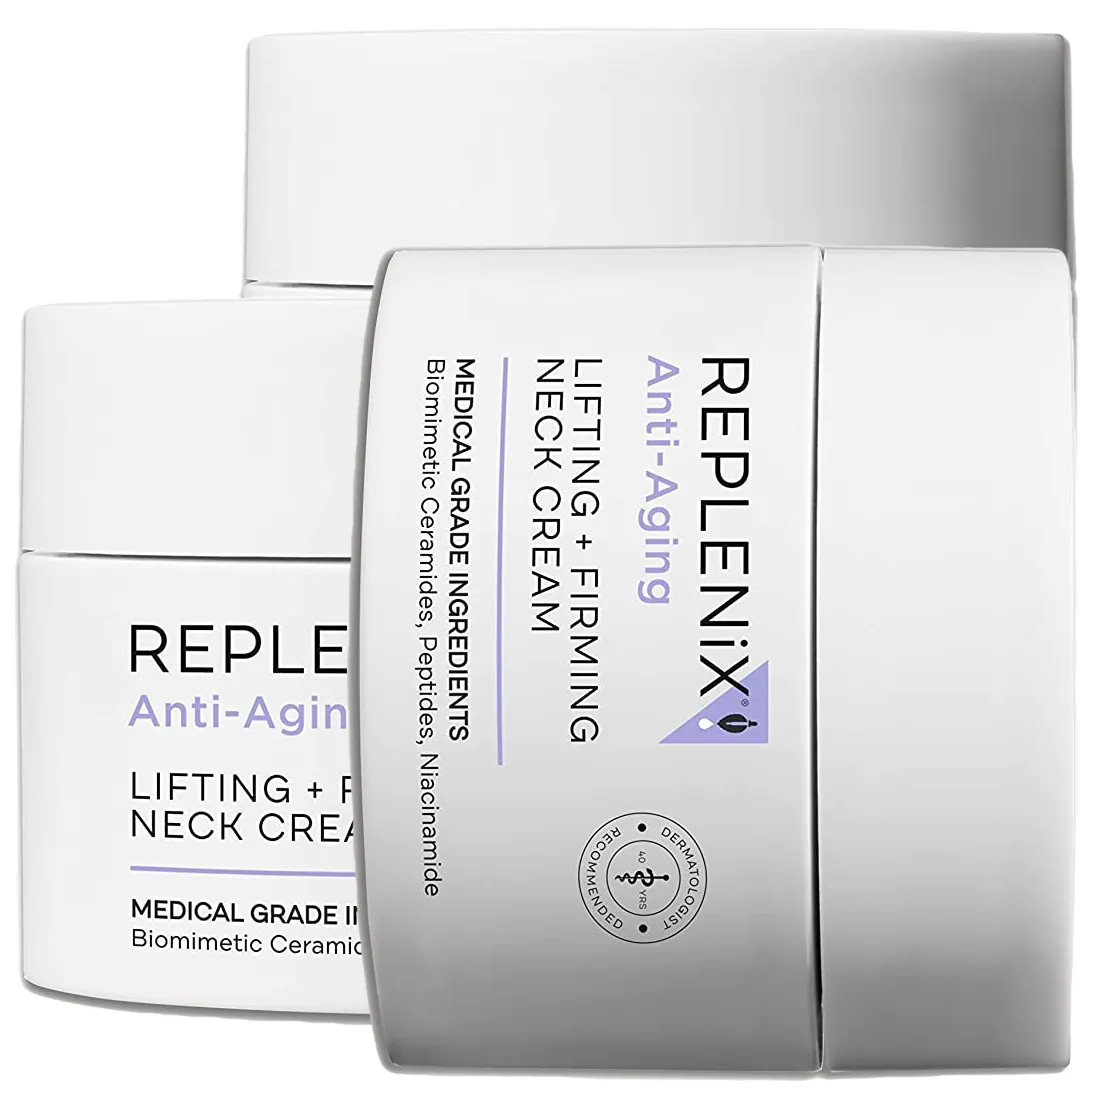 Free REPLENIX Anti-Aging Lifting And Firming Neck Cream